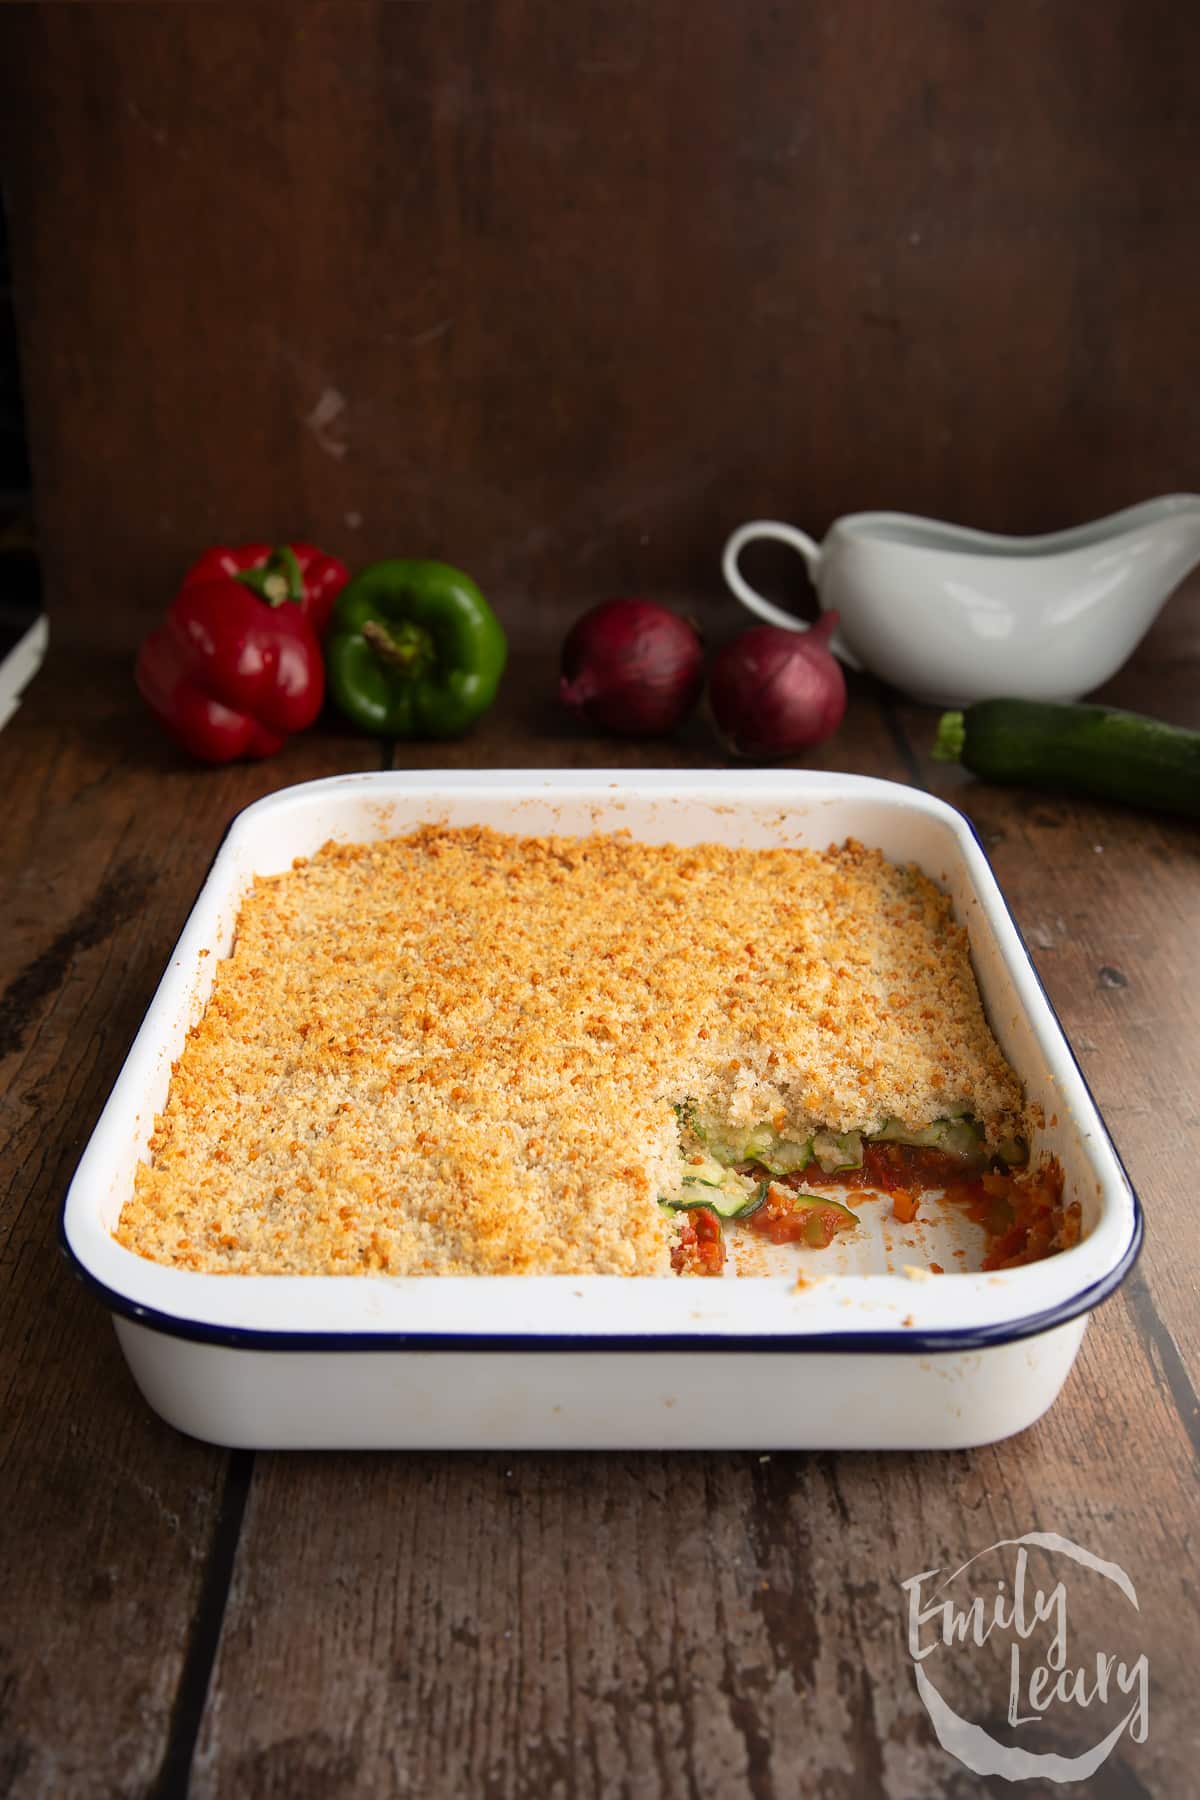 Tomato and courgette gratin in a white baking dish eith a piece cut out of the corner.